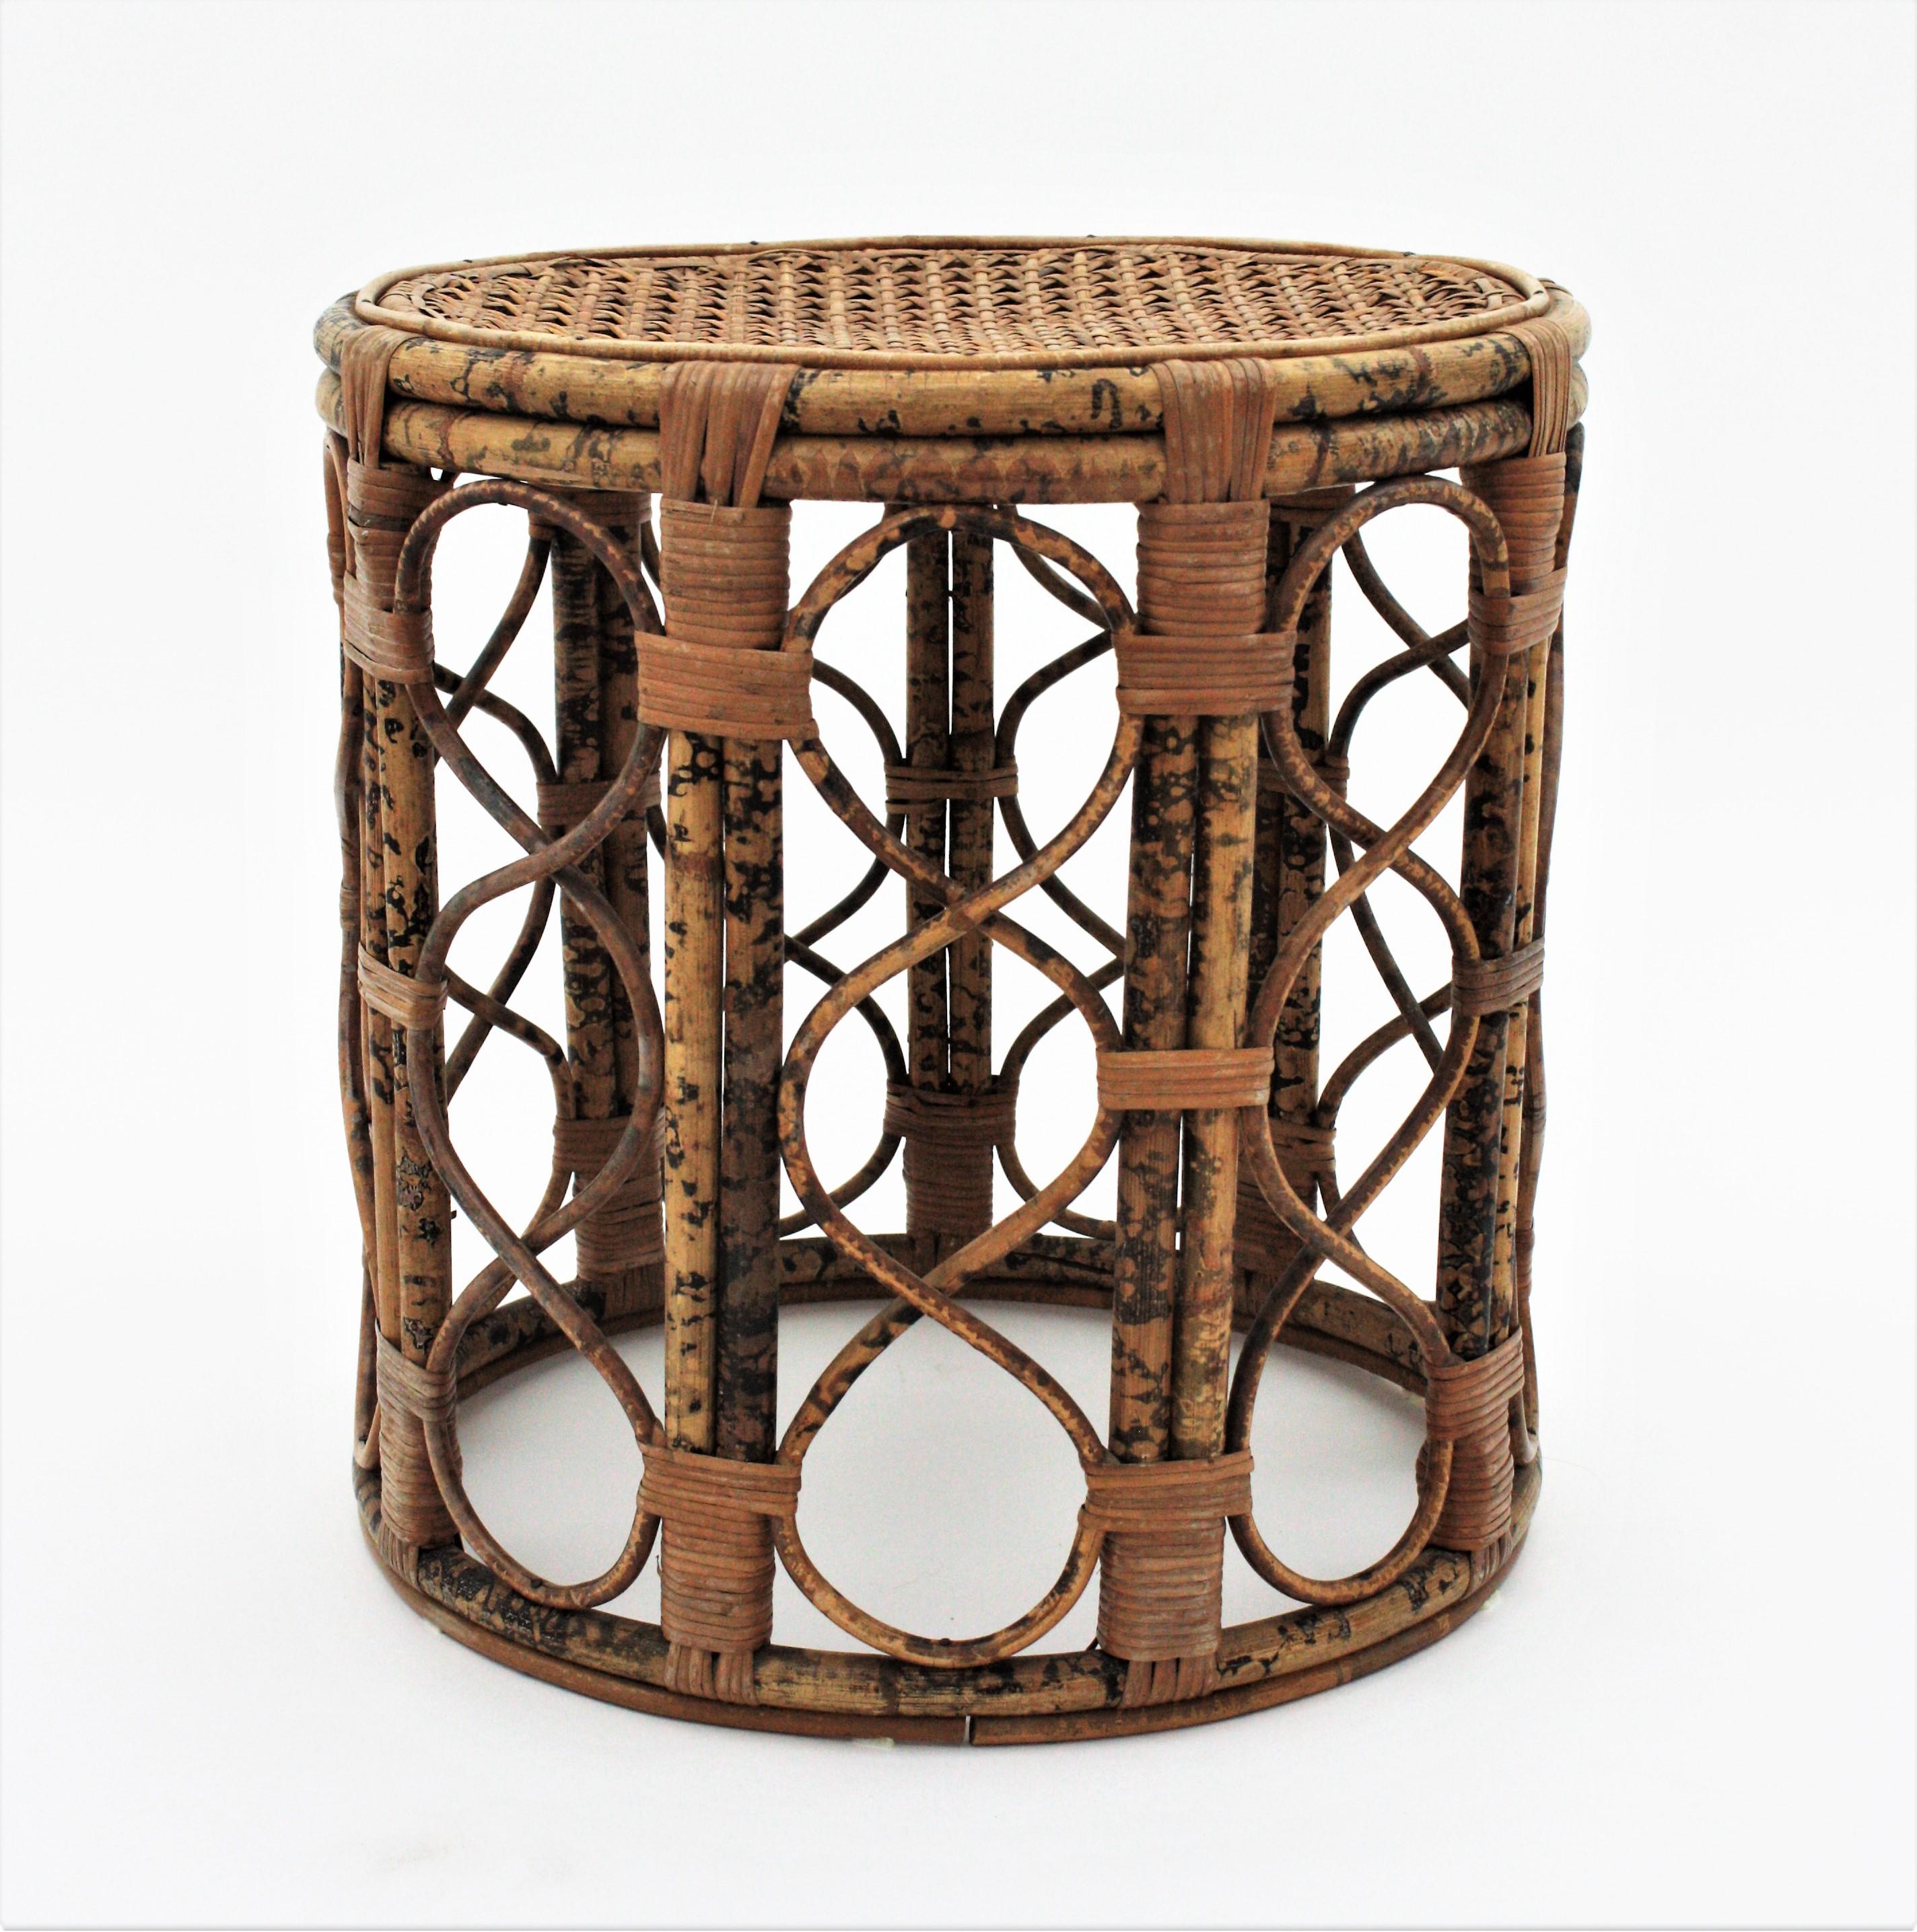 French Side Table or Stool in Tiger Bamboo Rattan with Woven Wicker Top, 1940s For Sale 7